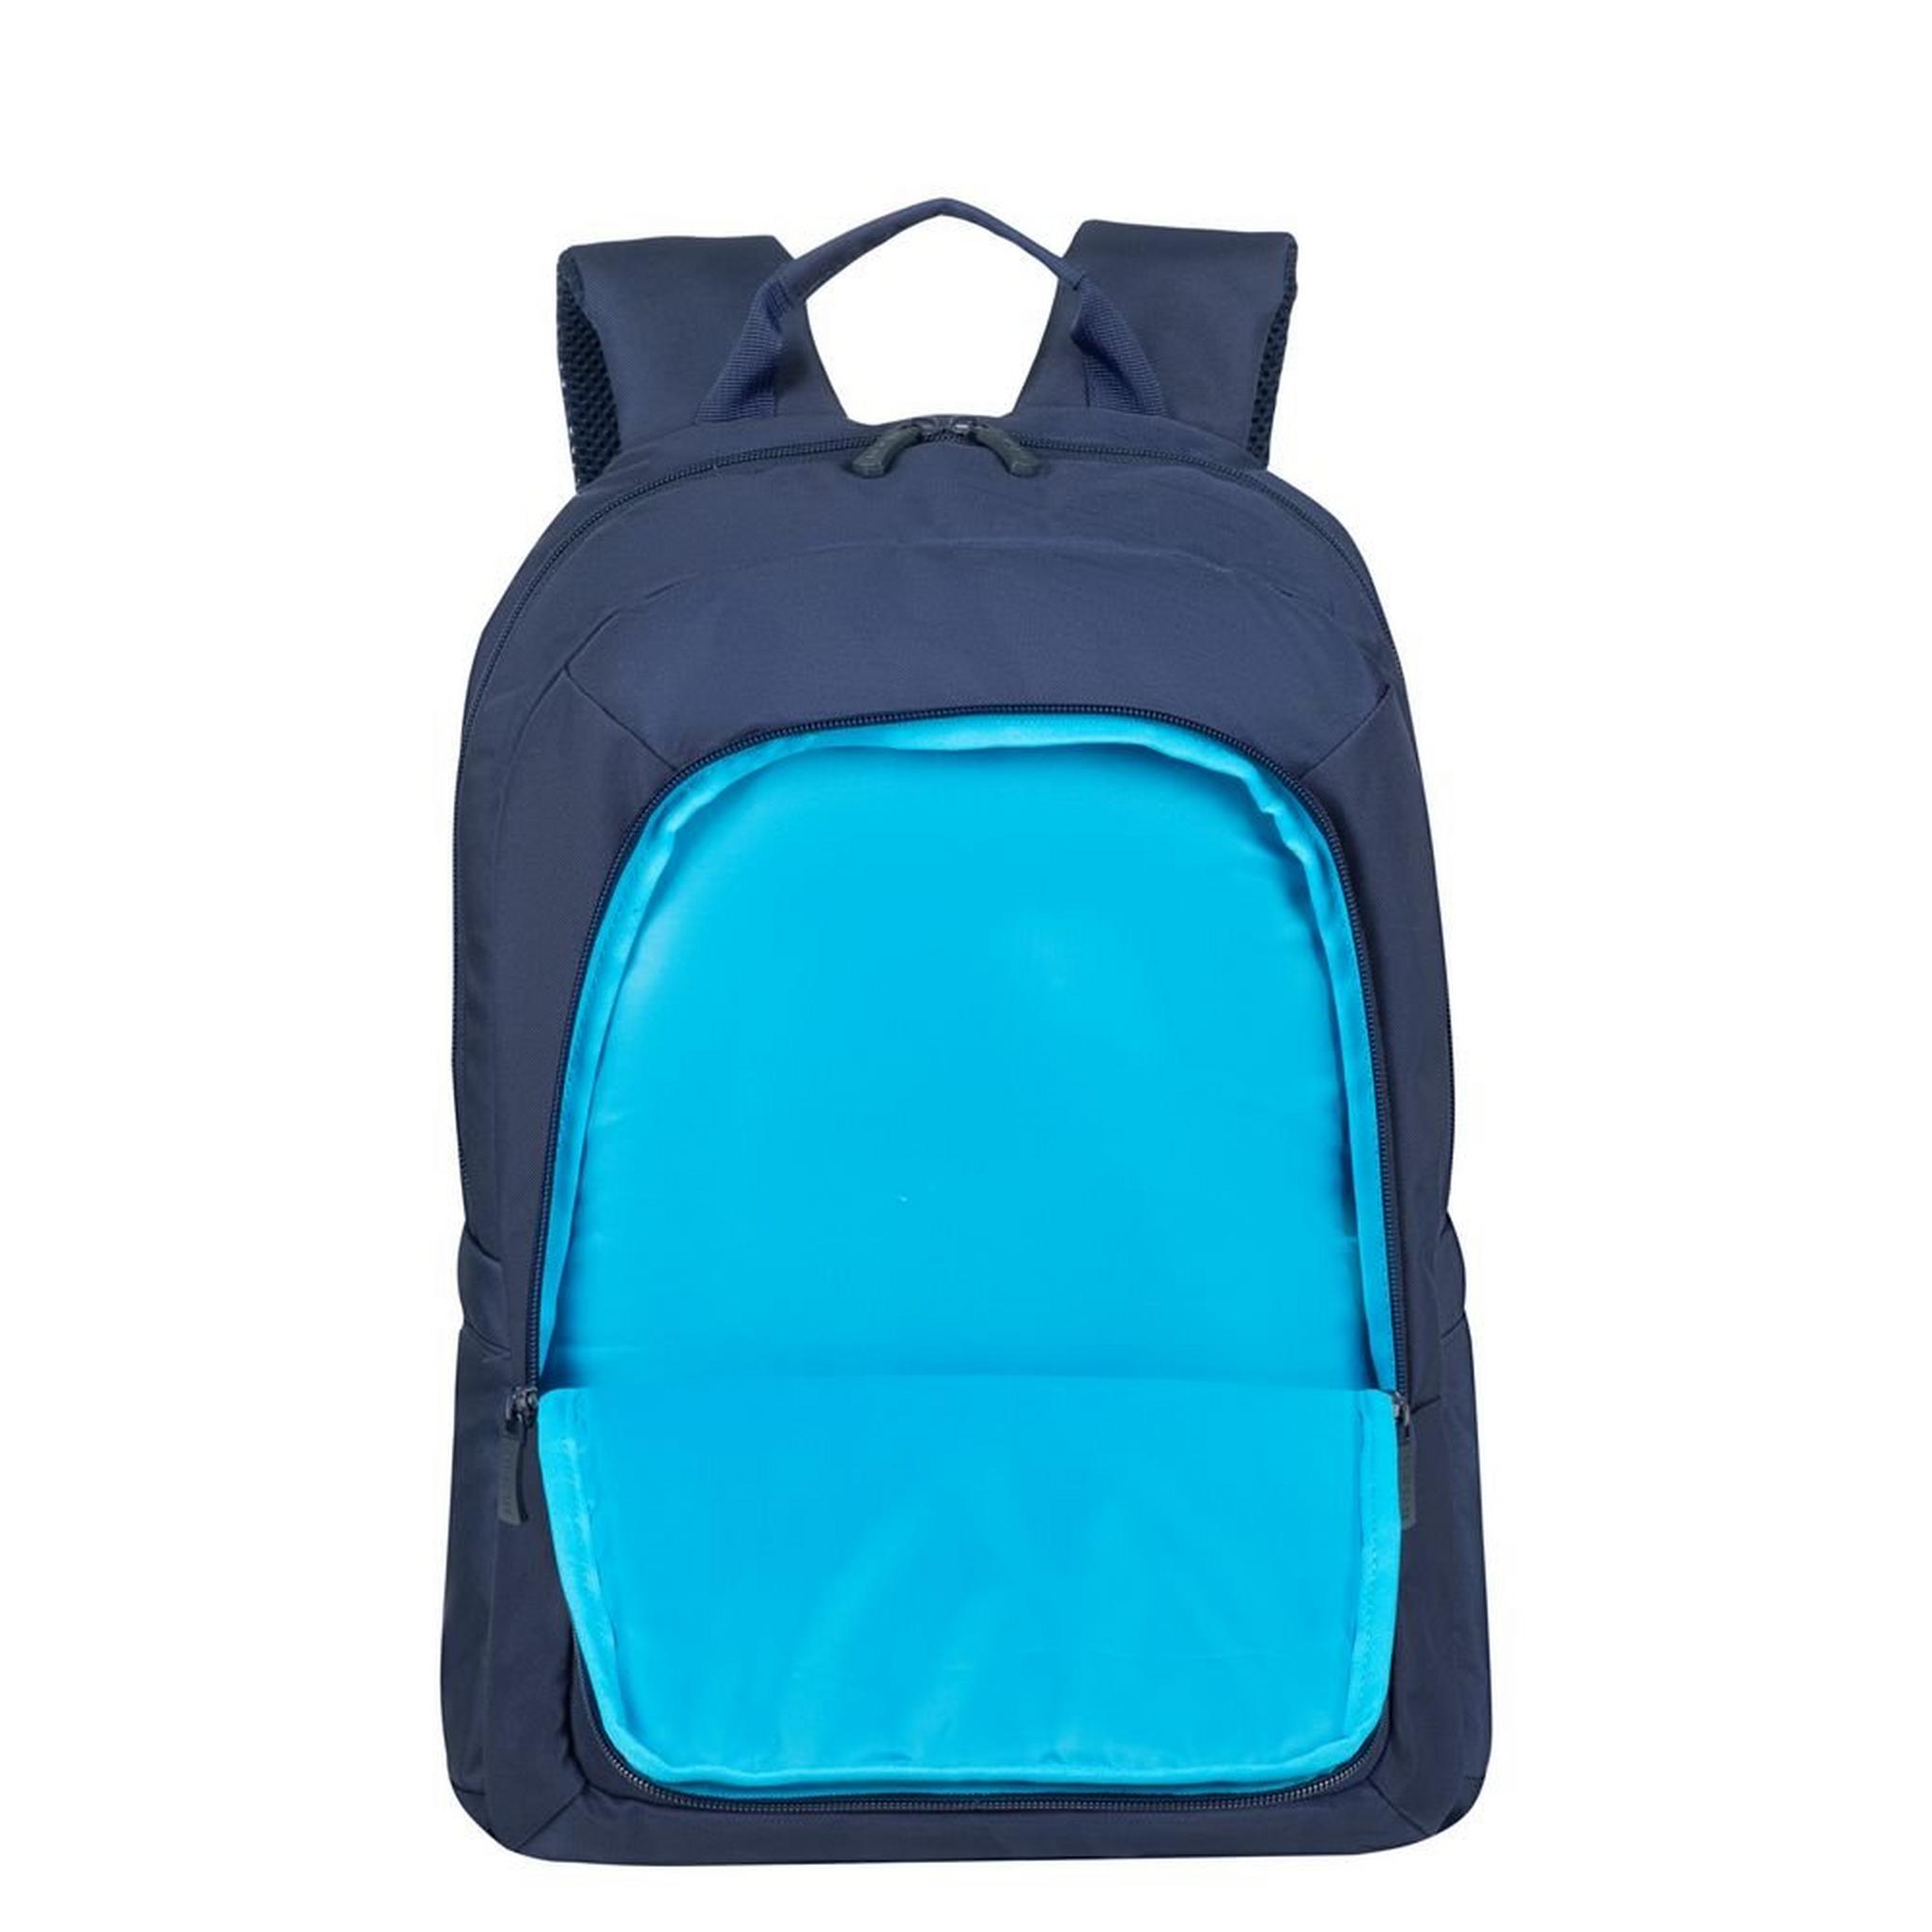 RIVA Alpendorf Laptop Backpack, 15.6 / 16-inch, ECO-7561 – Blue